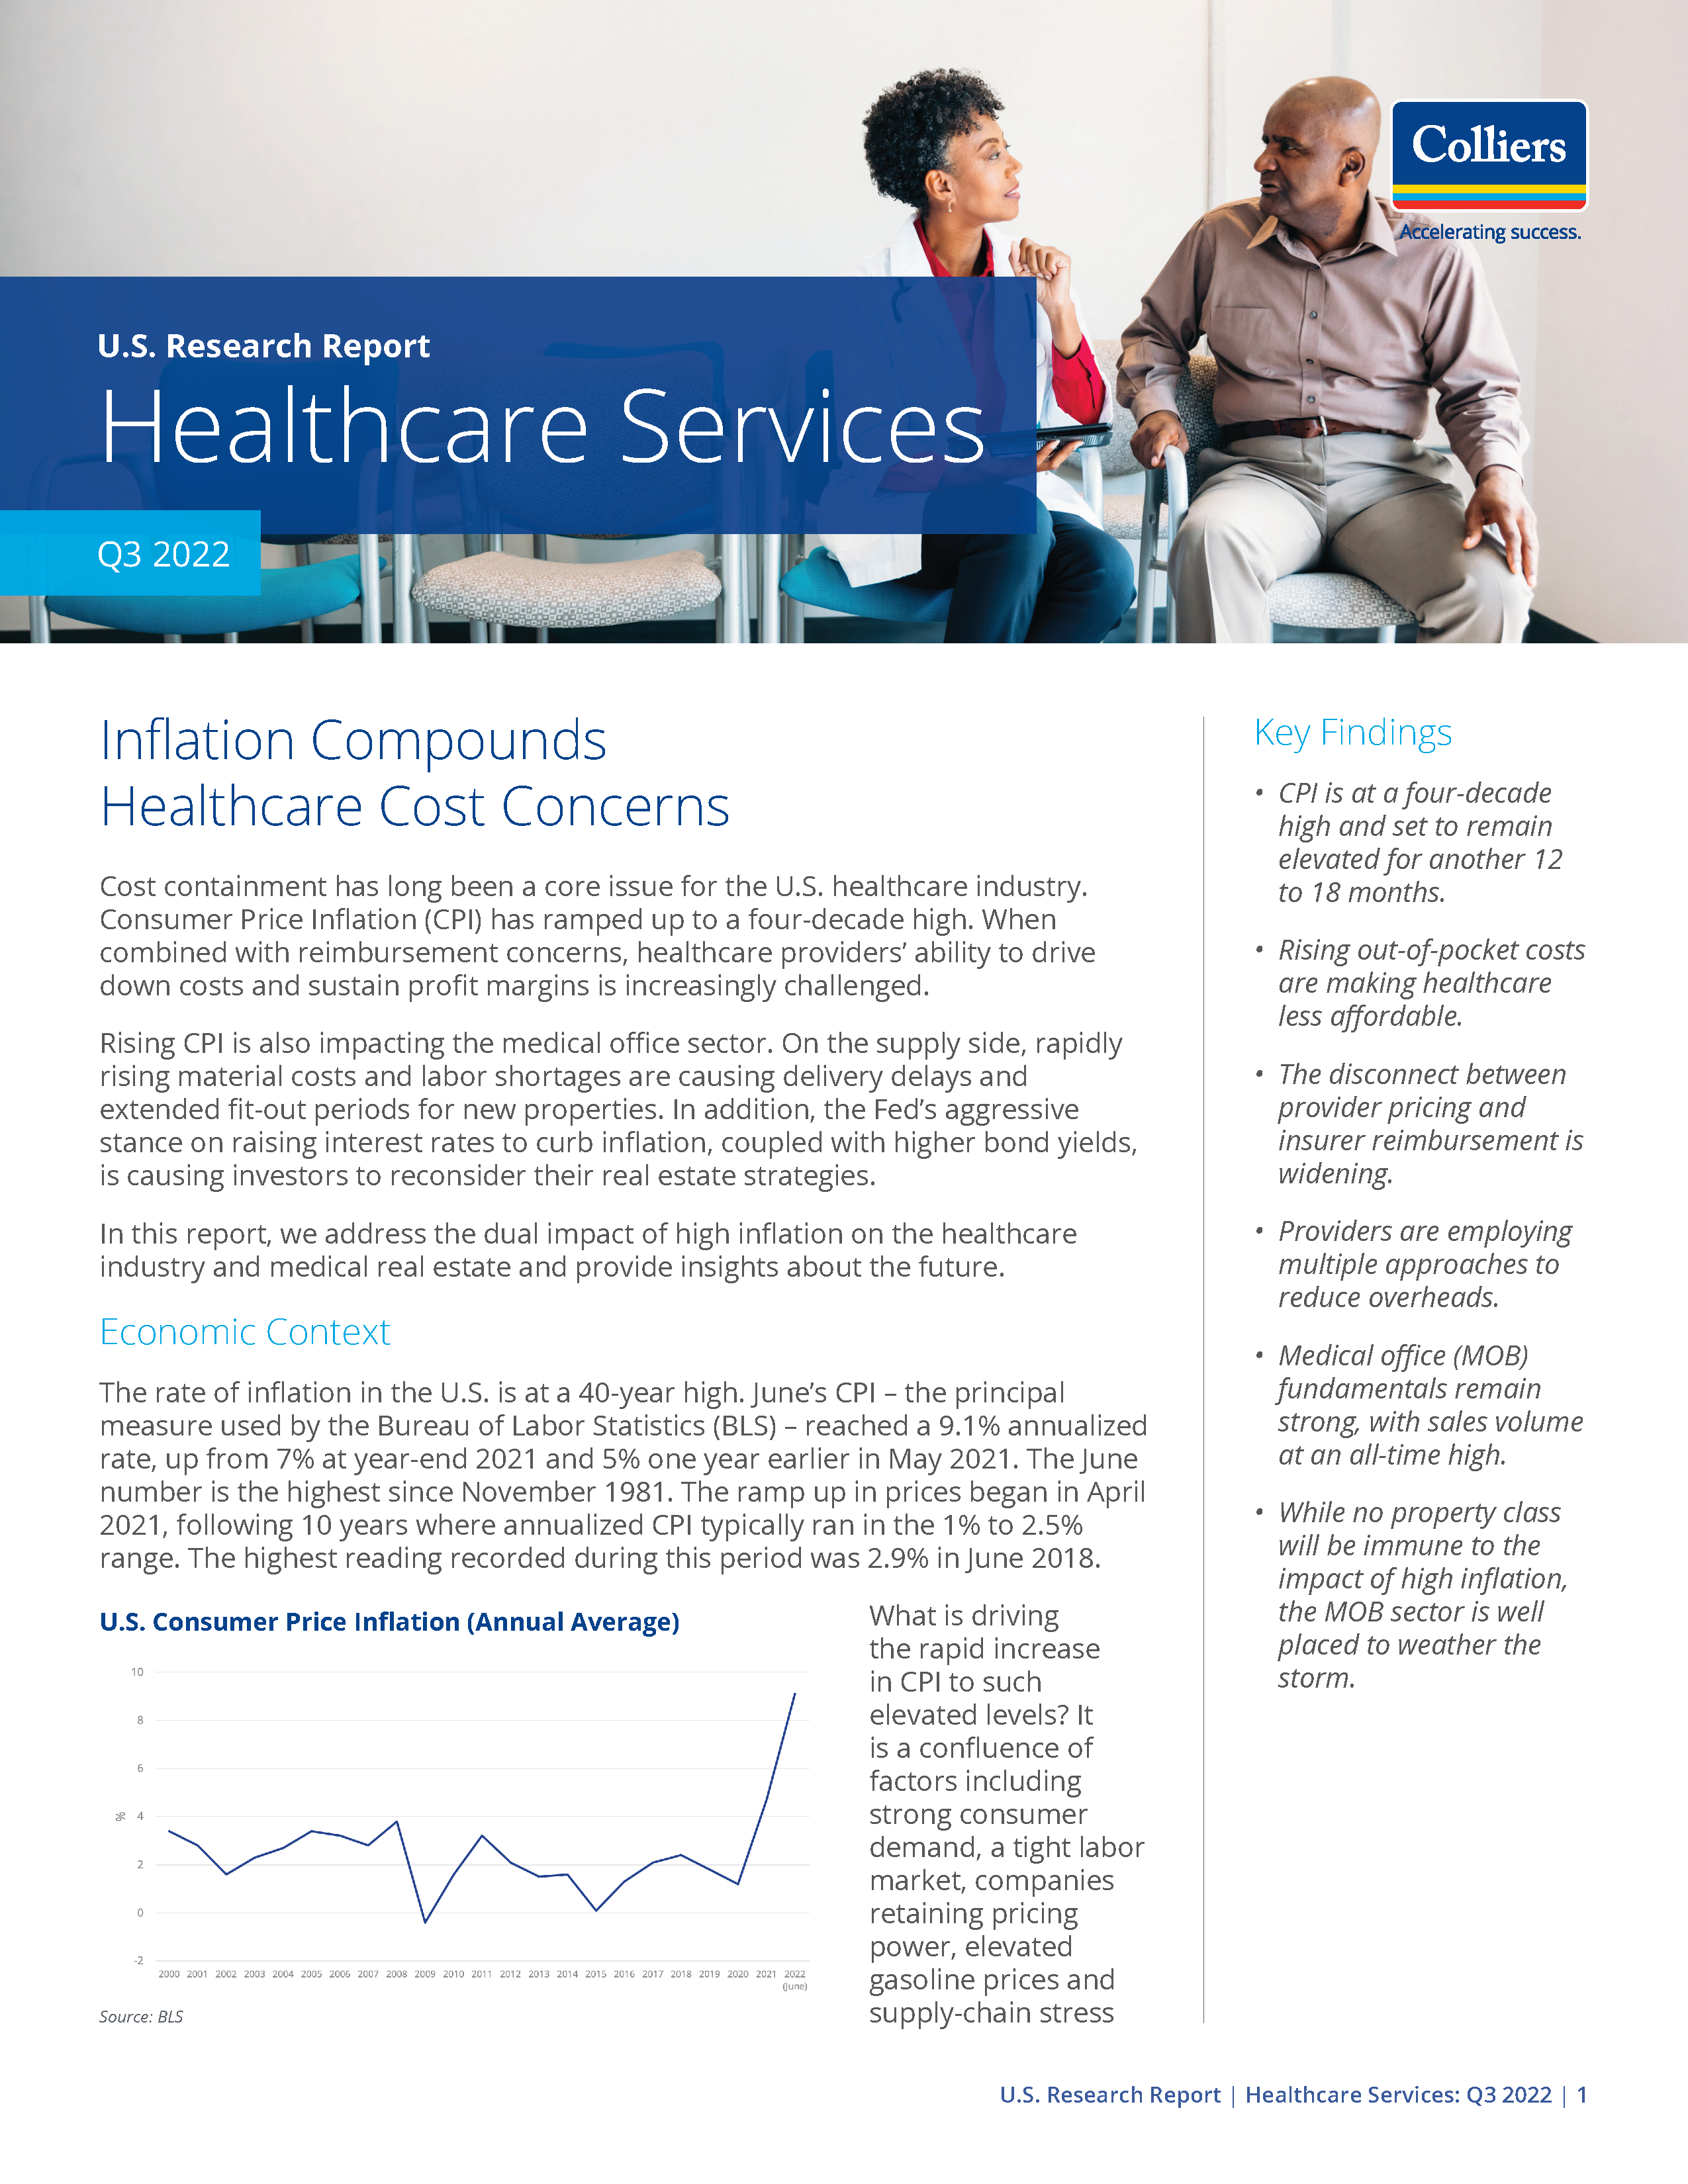 Thought Leaders: 2022 Q2 Healthcare Services Research Report (Colliers)